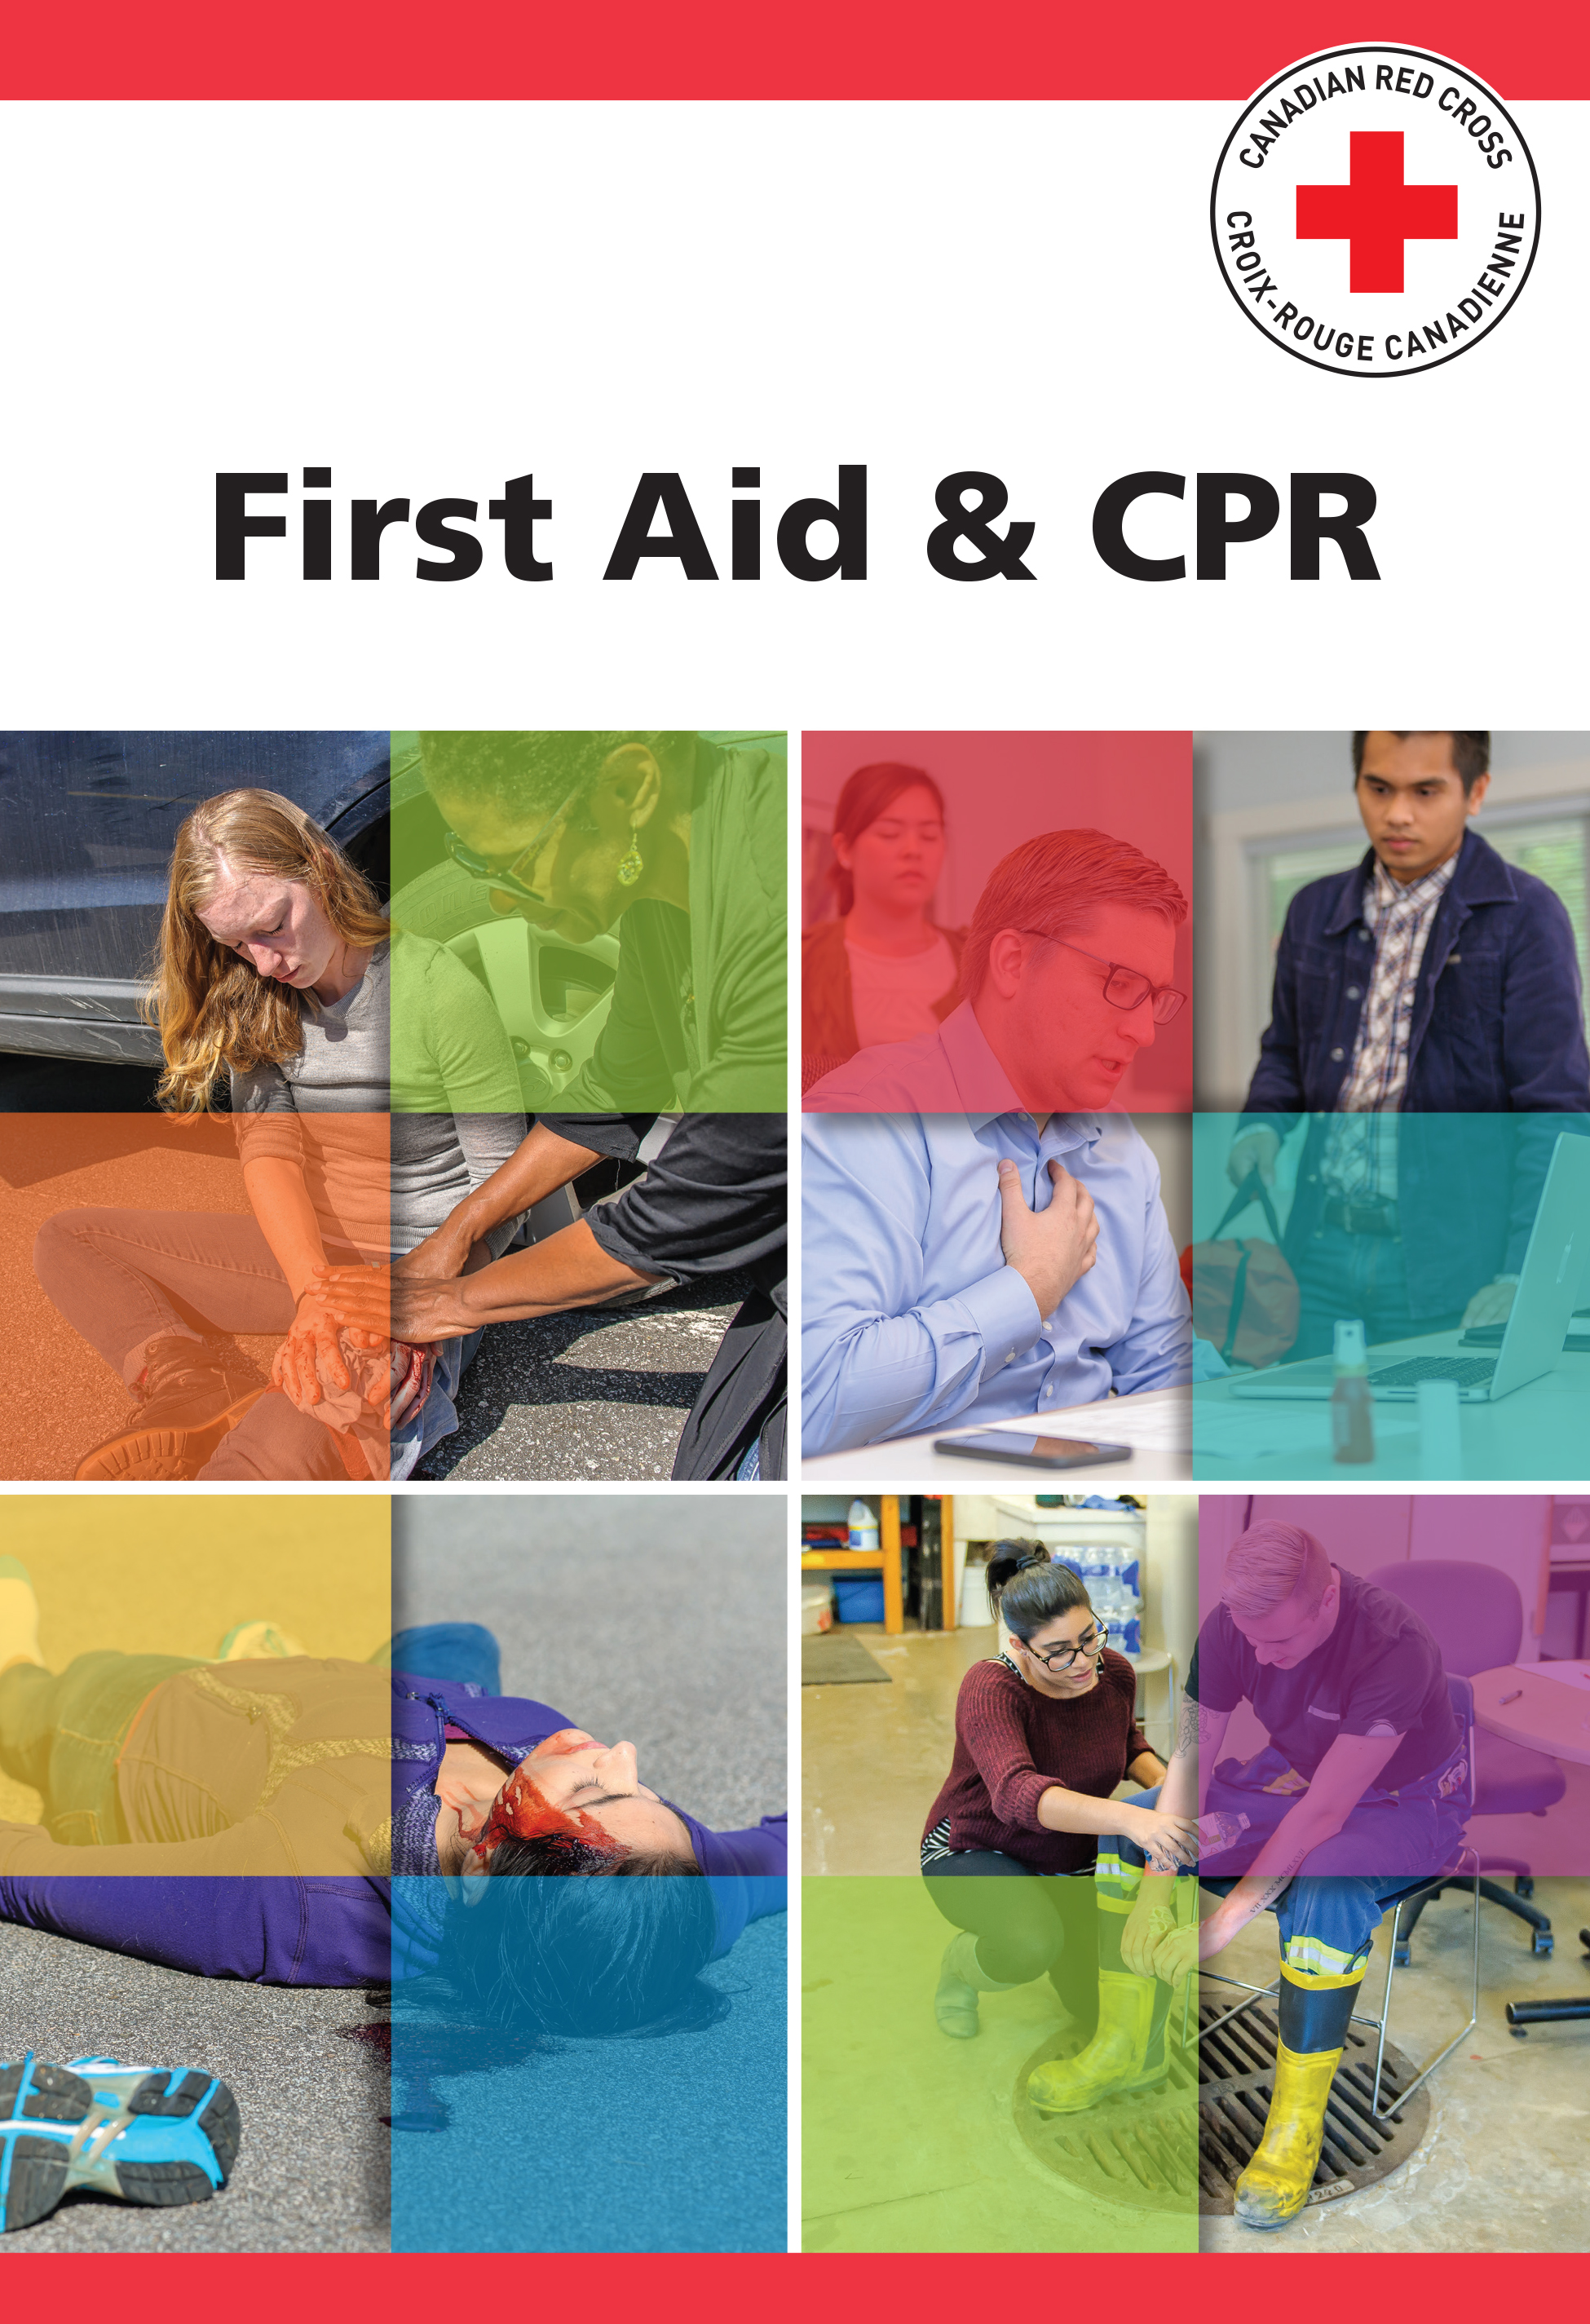 First Aid Course Materials for Marine Basic First Aid Course - CPR (Blended)